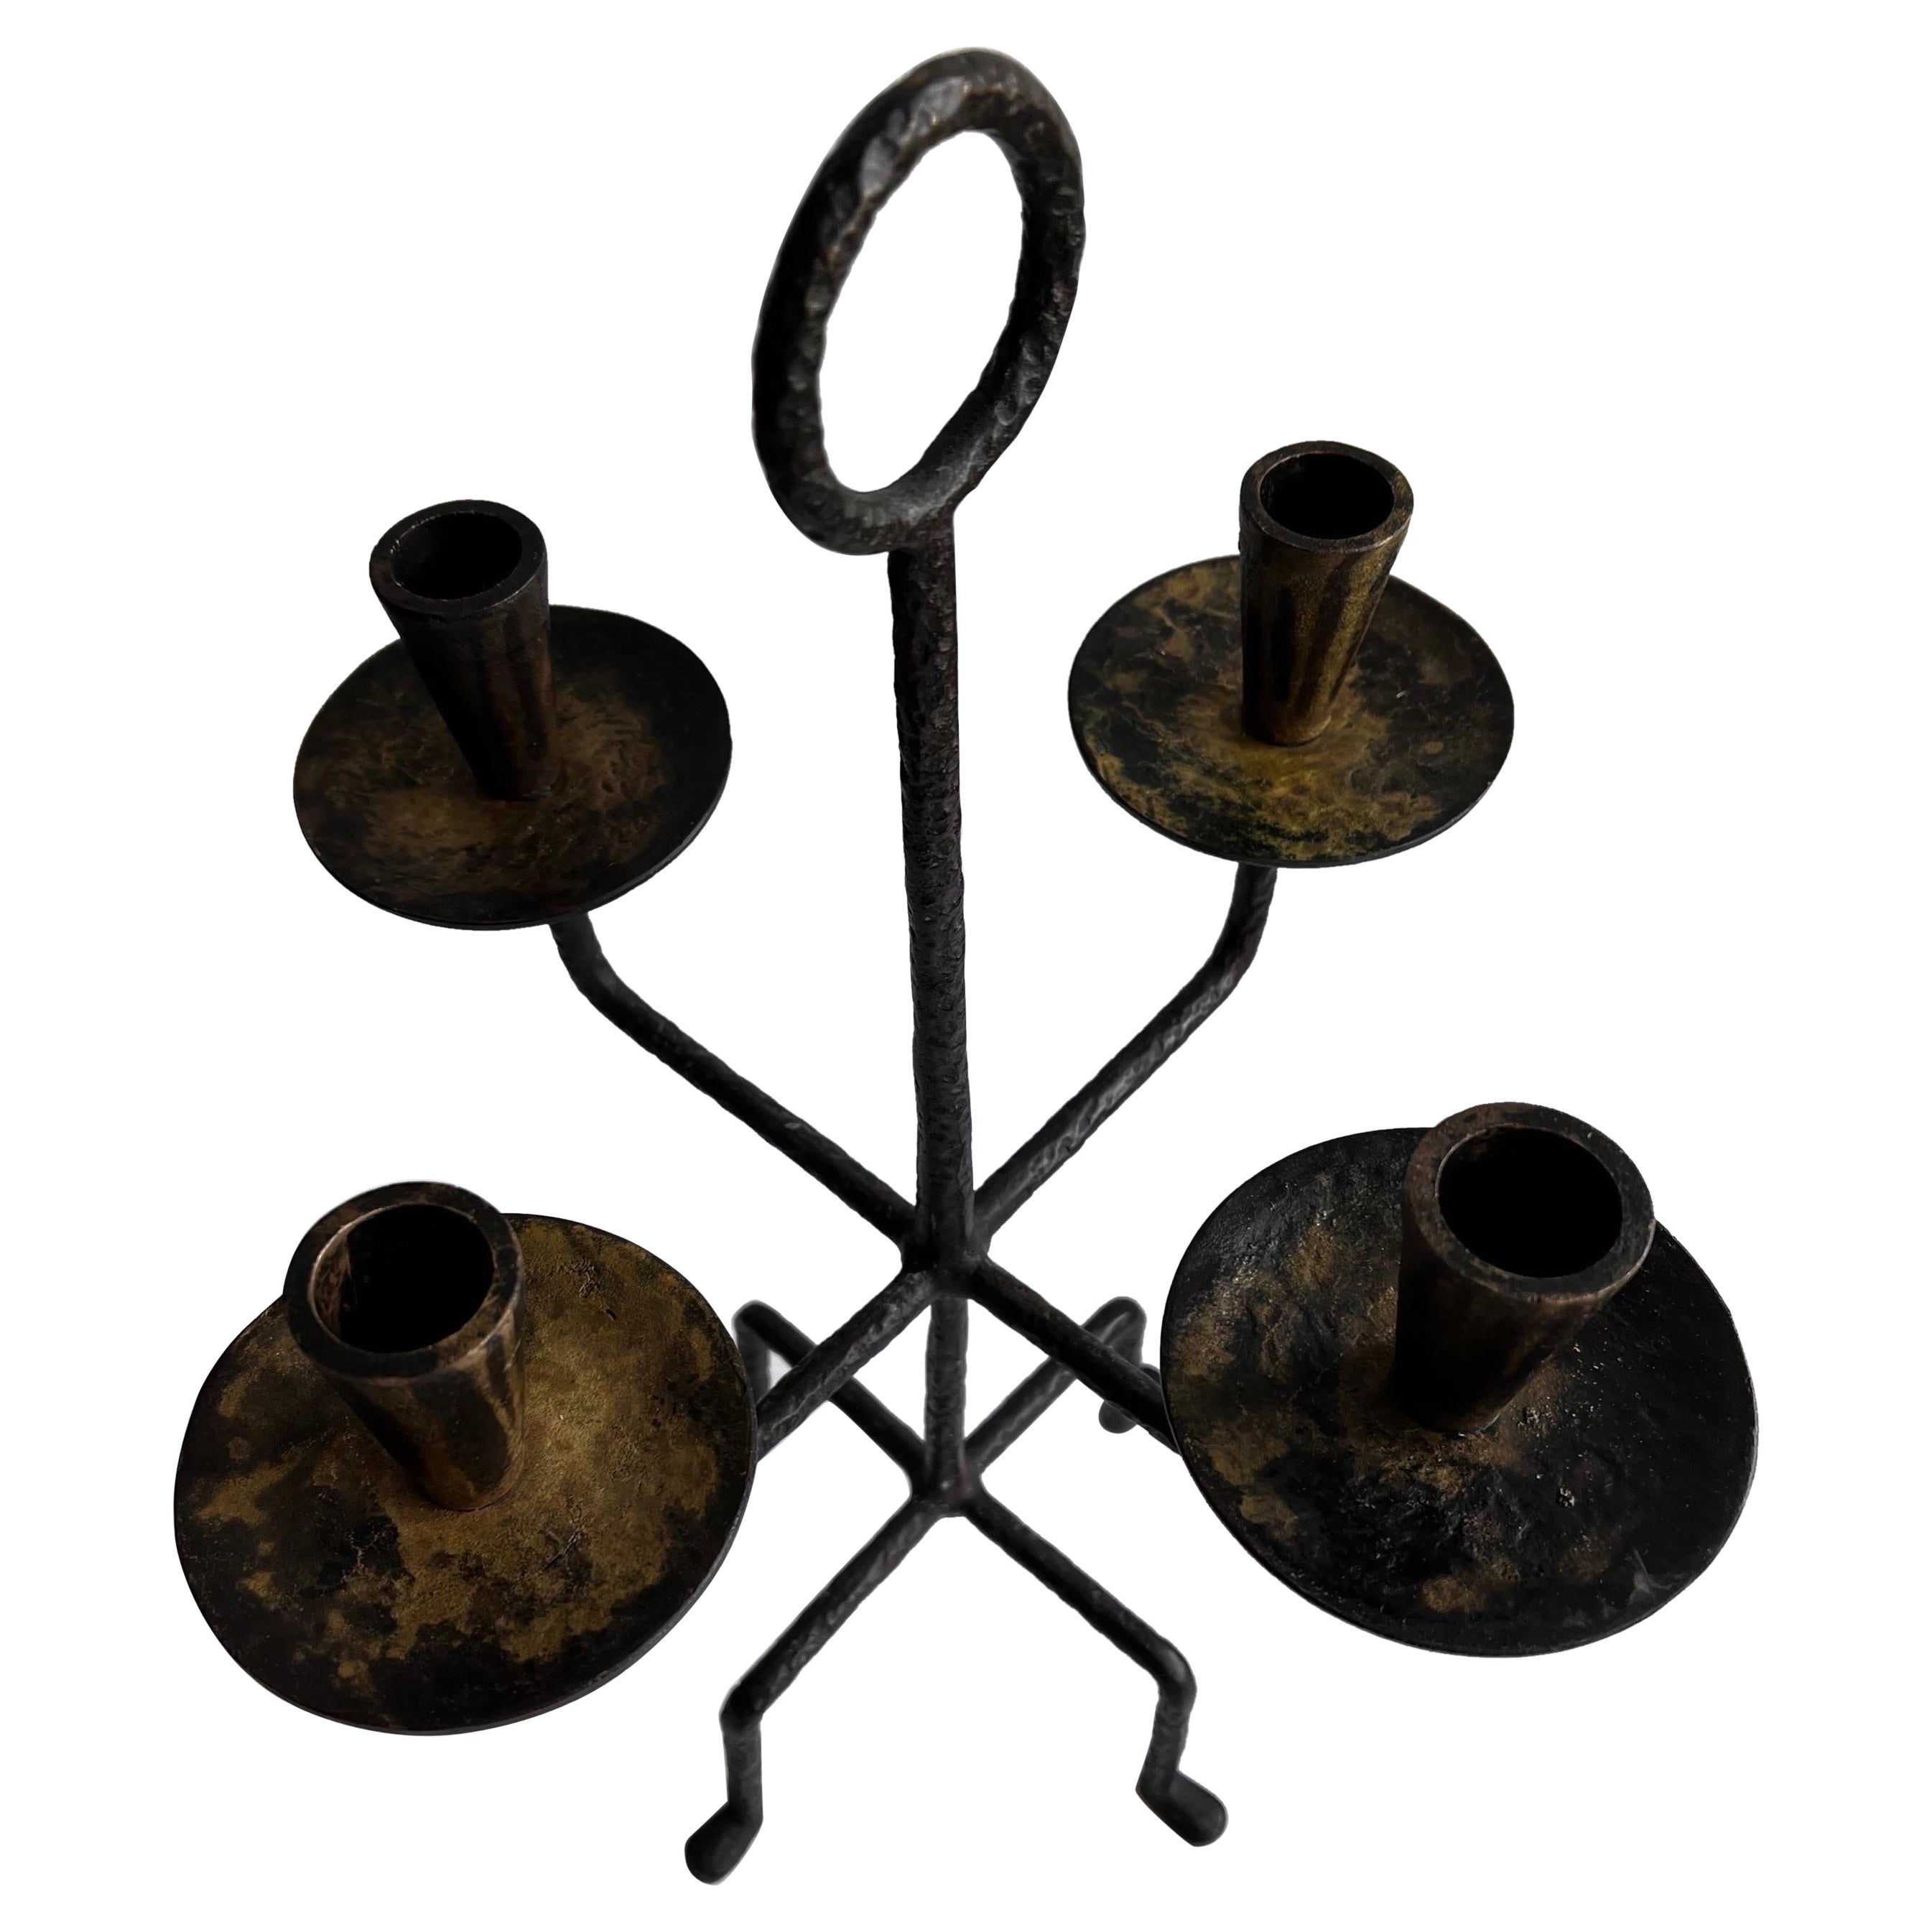 Hammered Bronze Candelabrum Attributed to Tommi Parzinger, circa 1930s